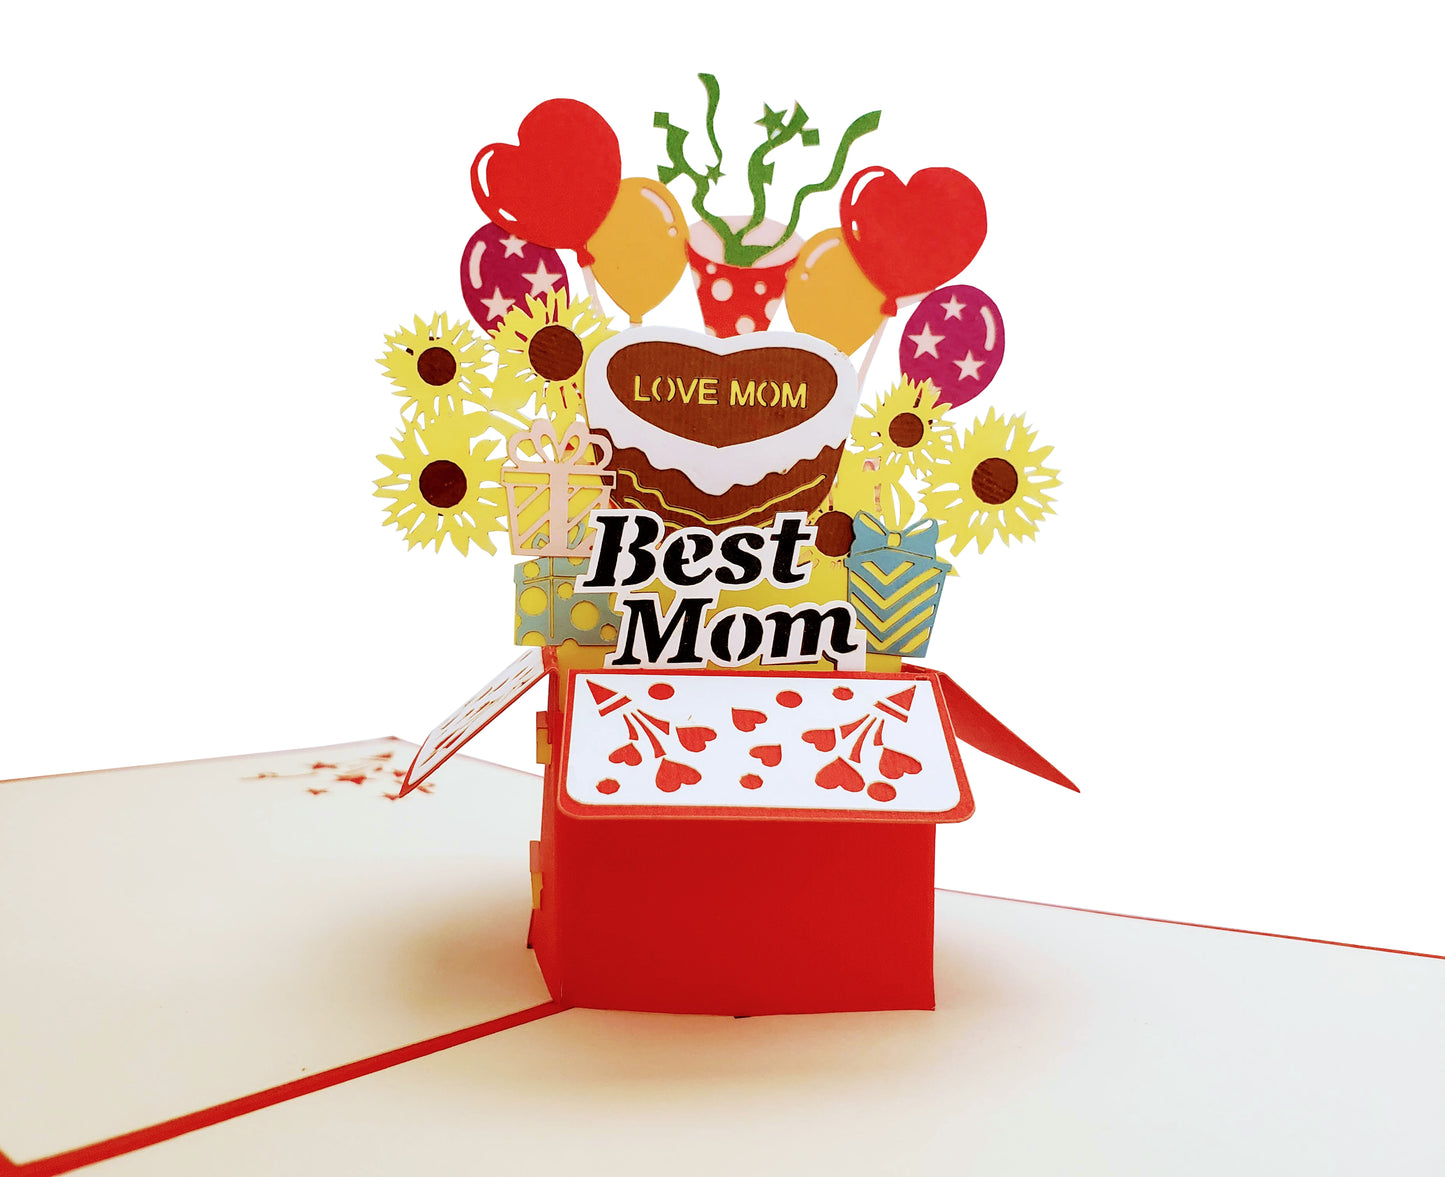 Best Mom Gift Box 3D Pop Up Greeting Card - best deal - Love - Mother's Day - new arrival - Special - iGifts And Cards